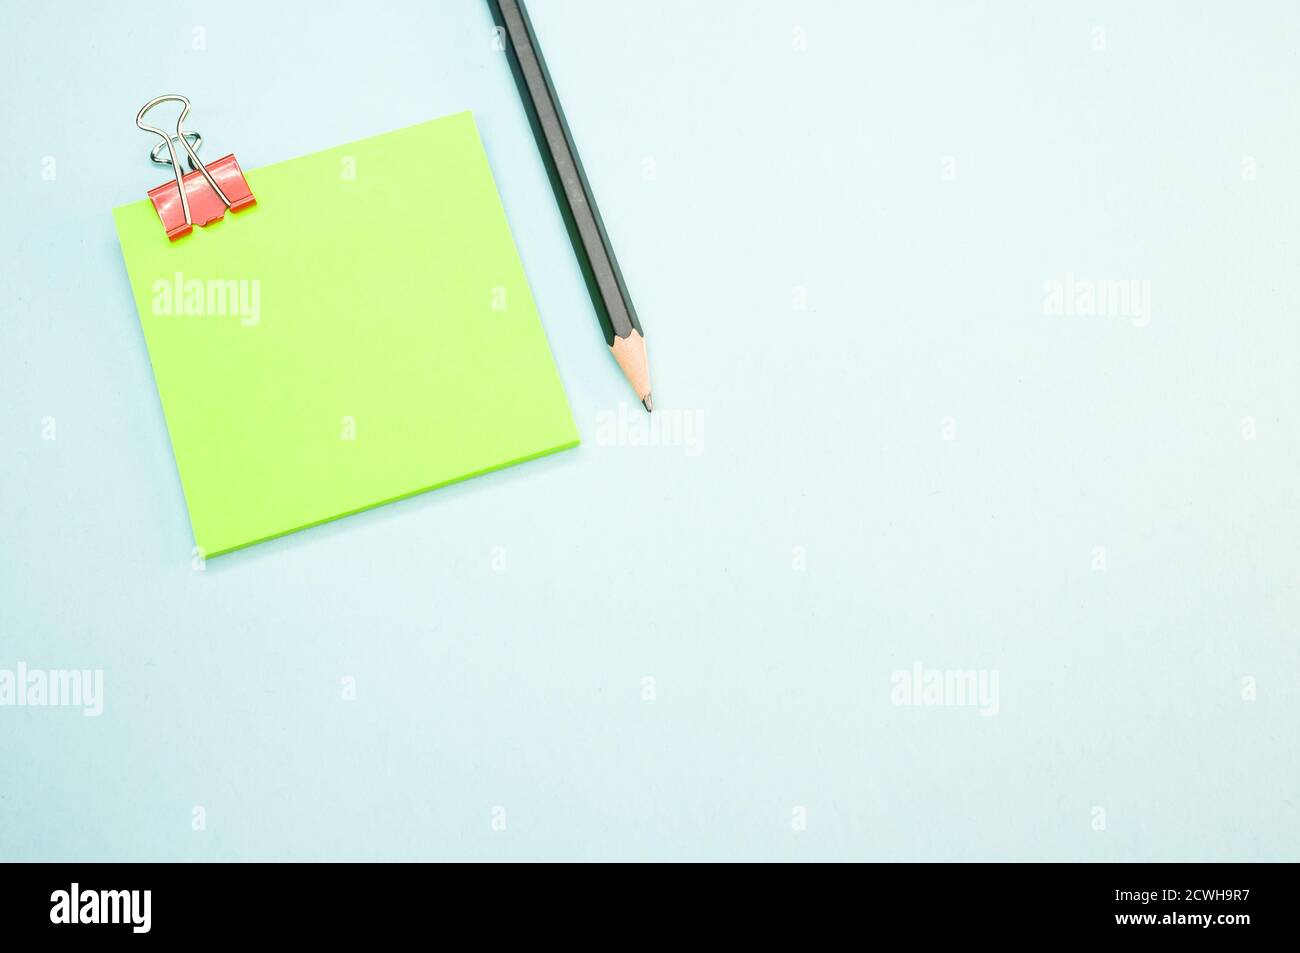 Closeup shot of the pencil and the notepad on the blue surface Stock Photo